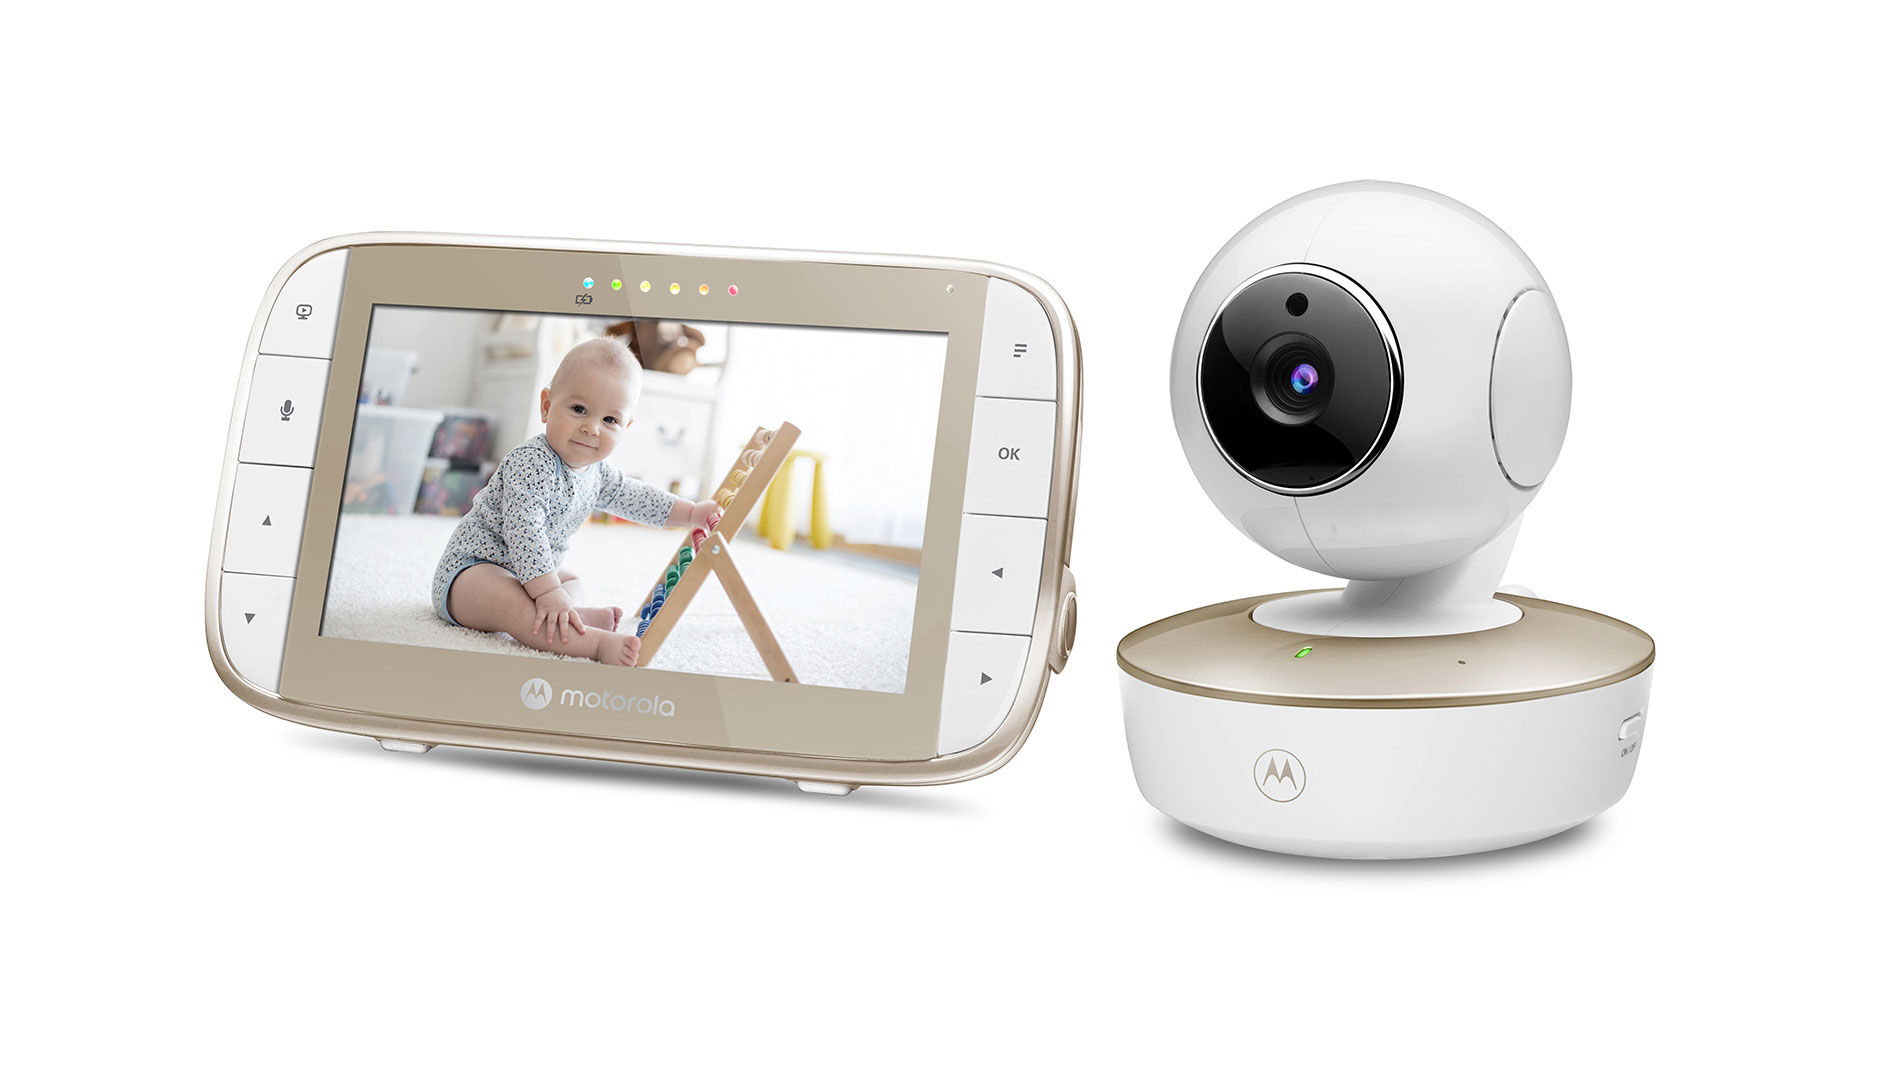 VM50g Video Baby Monitor - 5" screen 2 way talk with room temp monitor - Product image